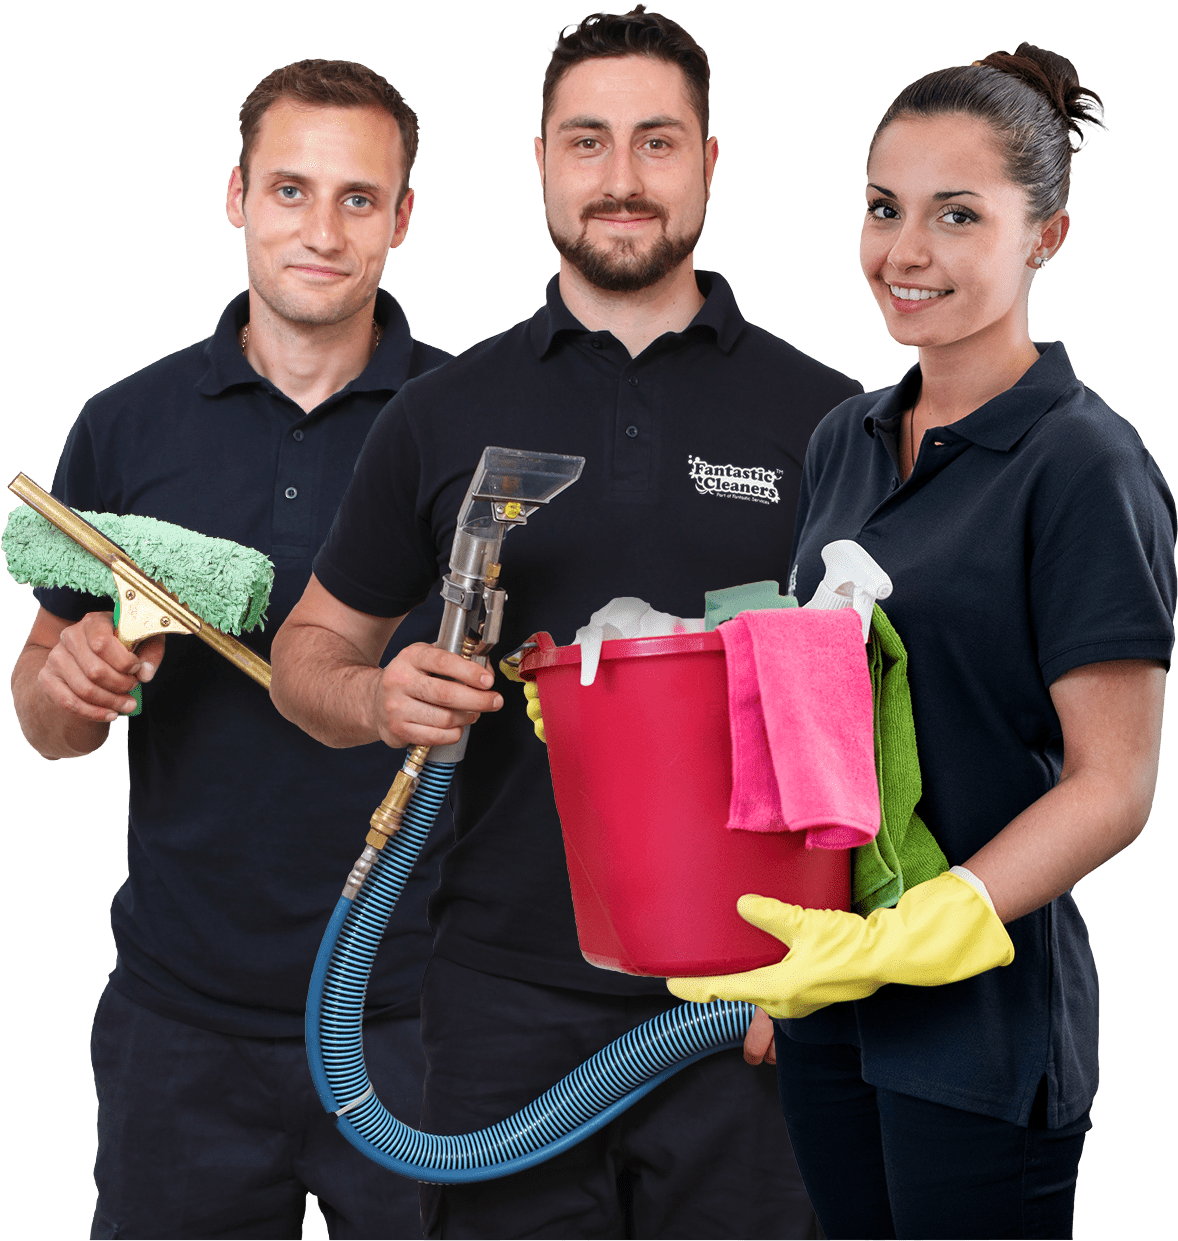 A team of 3 Fantastic cleaners